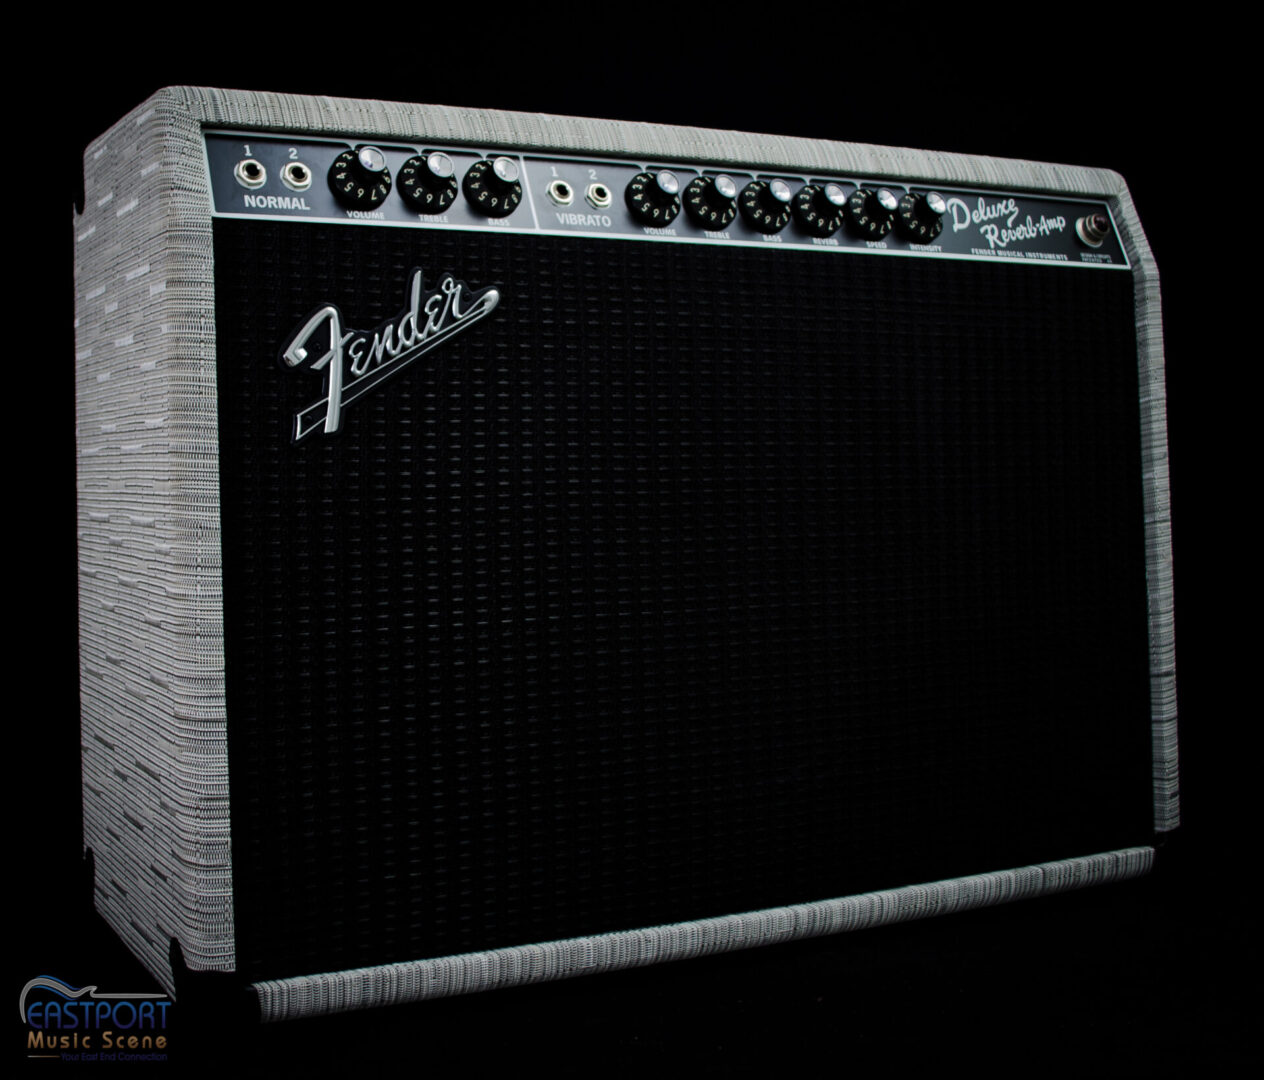 A fender guitar amplifier is shown in this image.